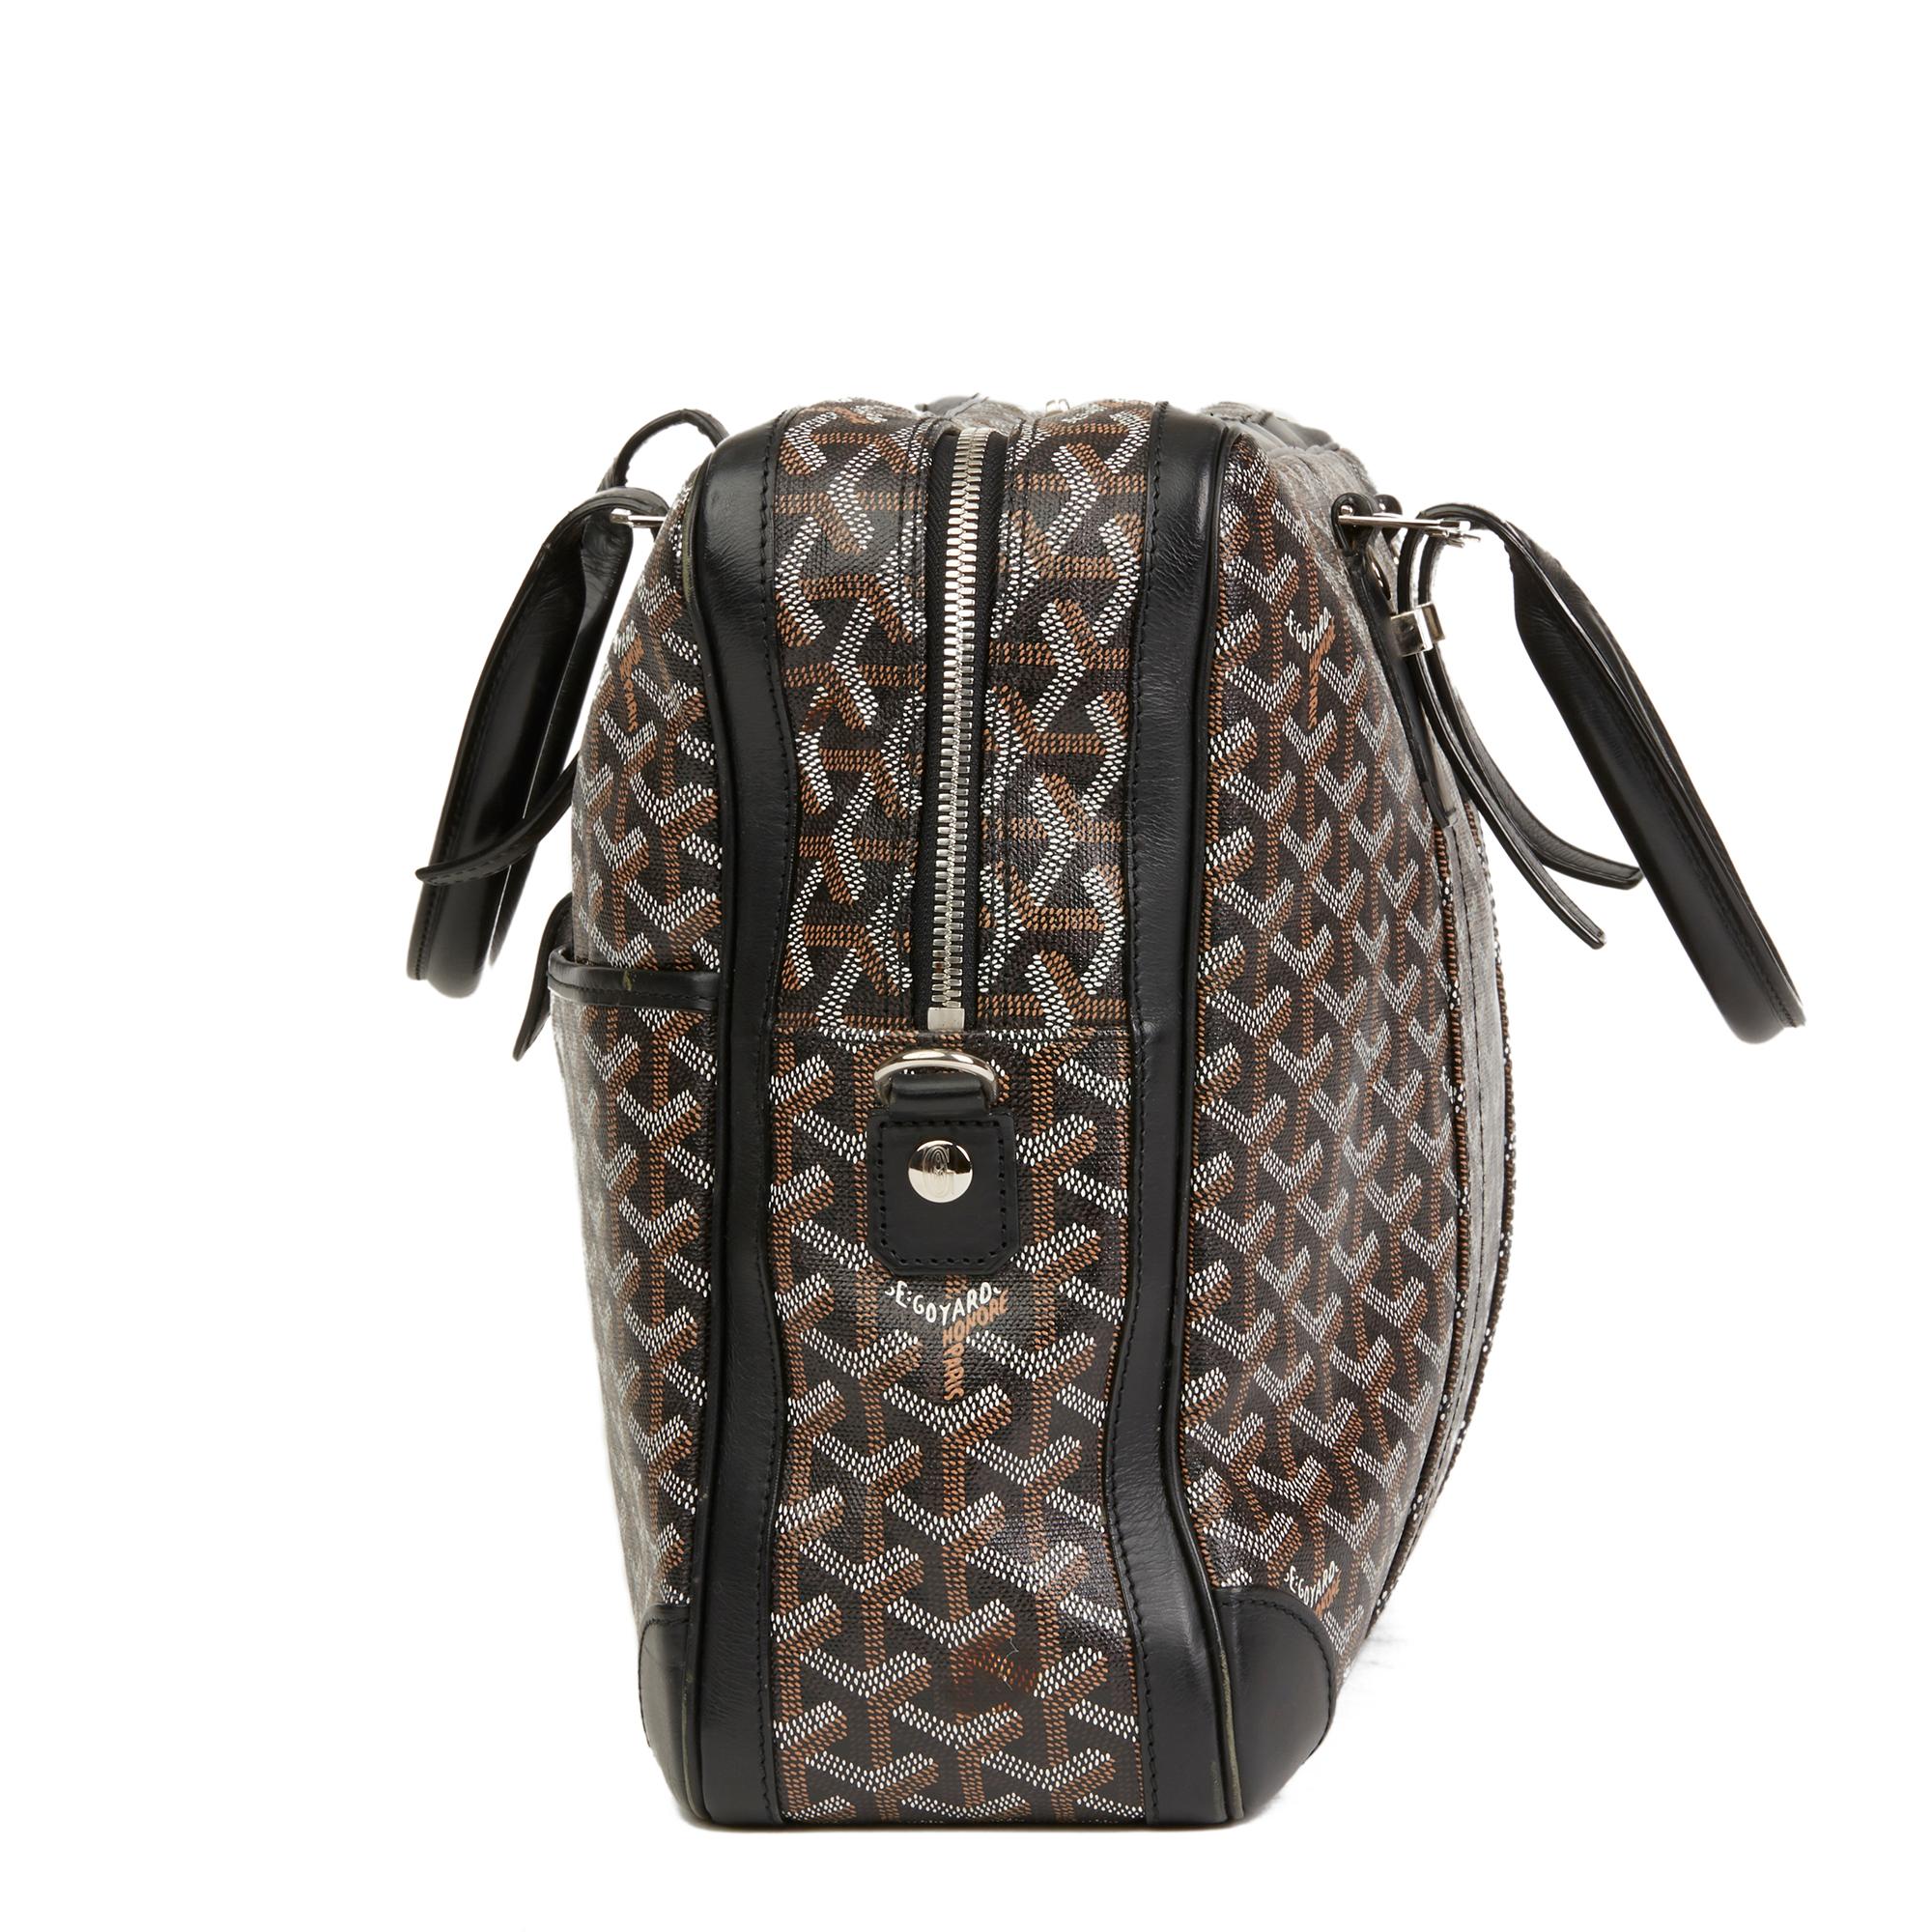 GOYARD
Black Chevron Coated Canvas Ambassade MM

Reference: HB2562
Serial Number: ABA 120131
Age (Circa): 2010
Accompanied By: Shoulder Strap
Authenticity Details: Serial Stamp (Made in France)
Gender: Unisex
Type: Tote, Crossbody, Shoulder,